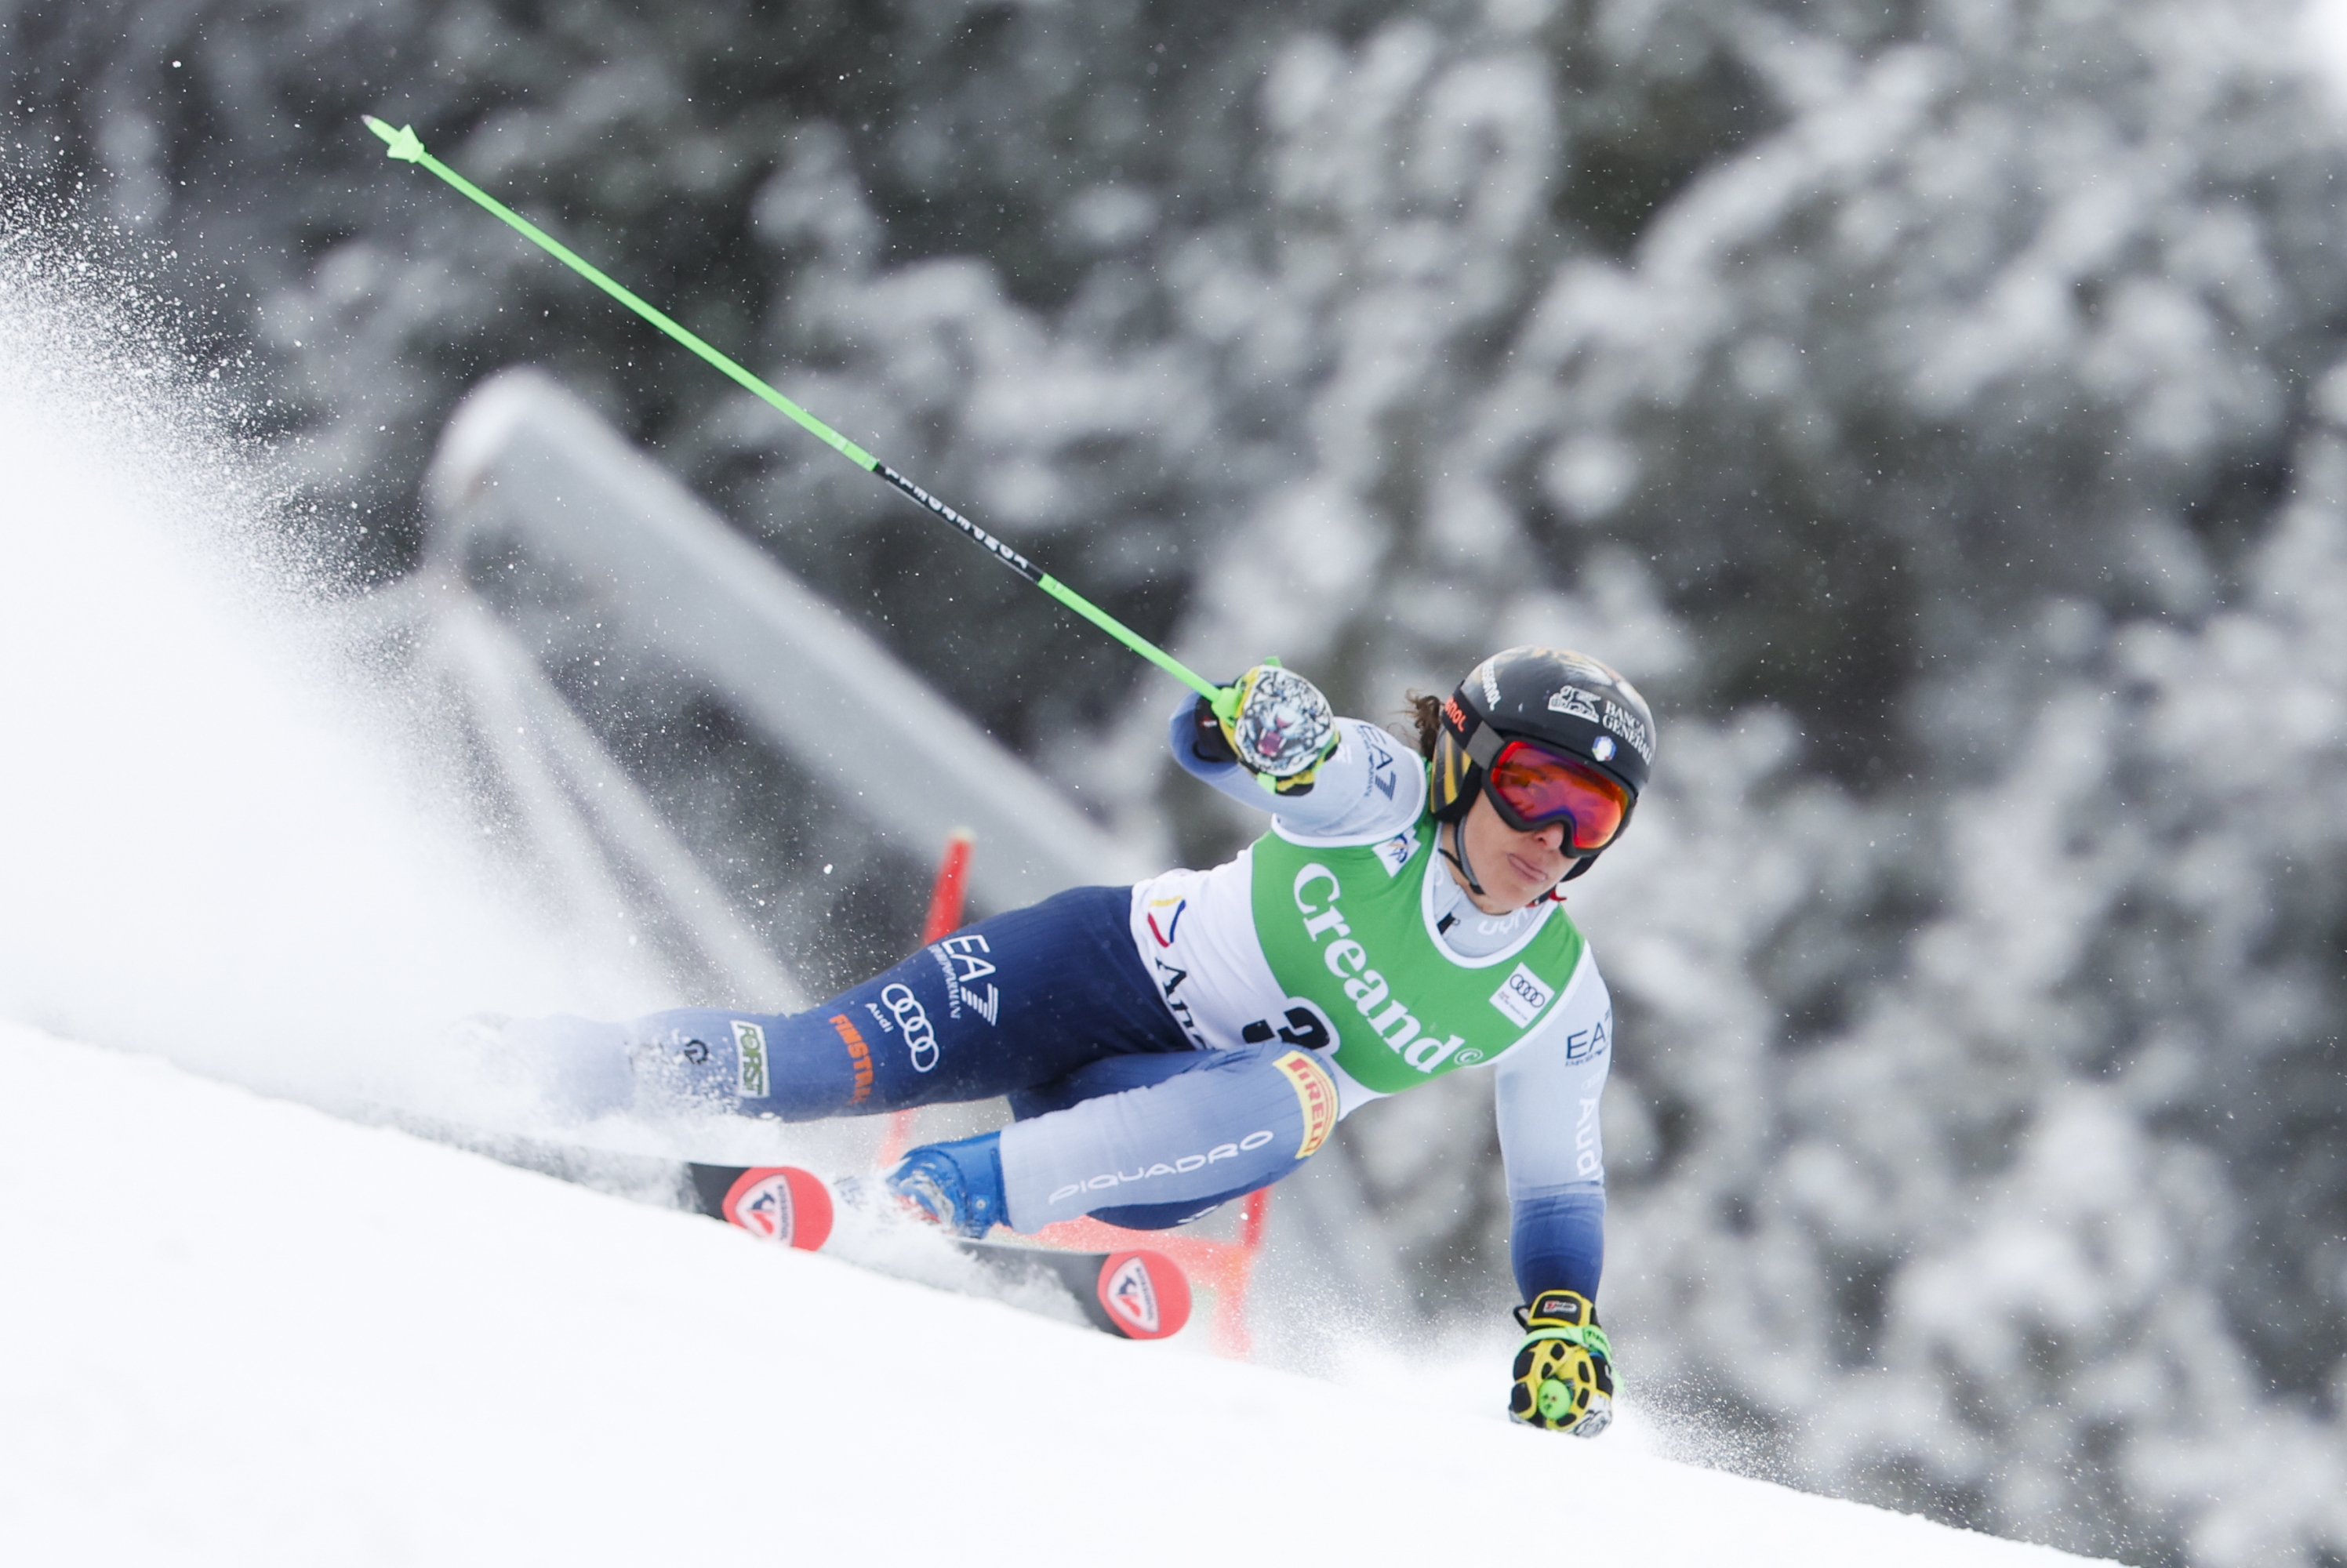 SOLDEU, ANDORRA - FEBRUARY 10: Federica Brignone of Team Italy in action during the Audi FIS Alpine Ski World Cup Women's Giant Slalom on February 10, 2024 in Soldeu, Andorra. (Photo by Alexis Boichard/Agence Zoom/Getty Images)